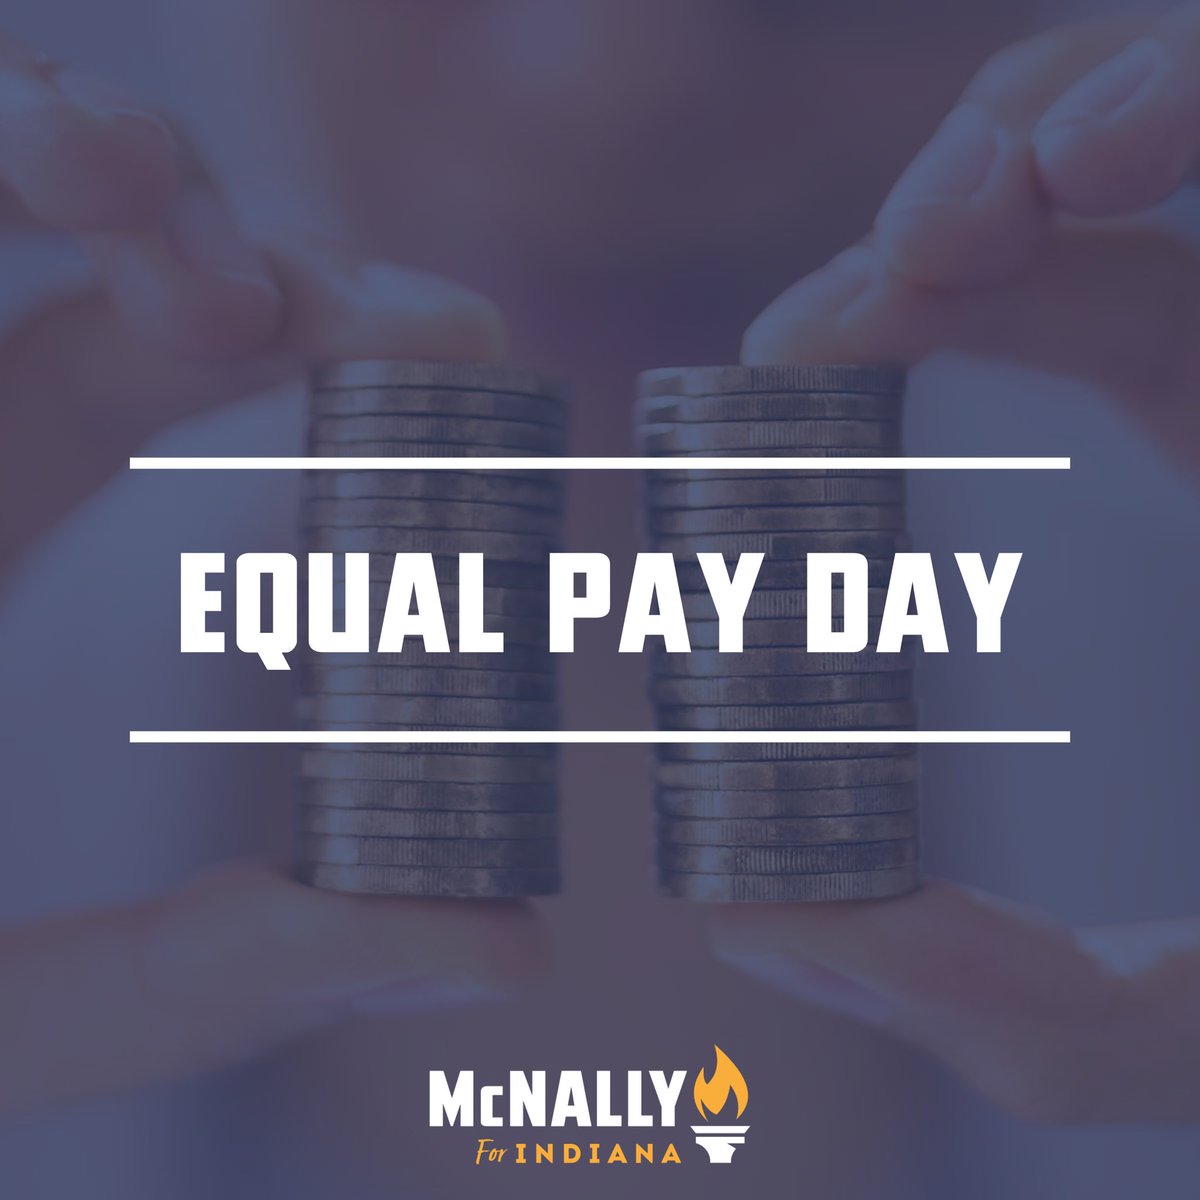 Indiana’s gender wage gap is among the worst in the nation, with women only making 72 cents for every dollar a man earns. On this Equal Pay Day, I am committing to closing the gender pay gap in Indiana.